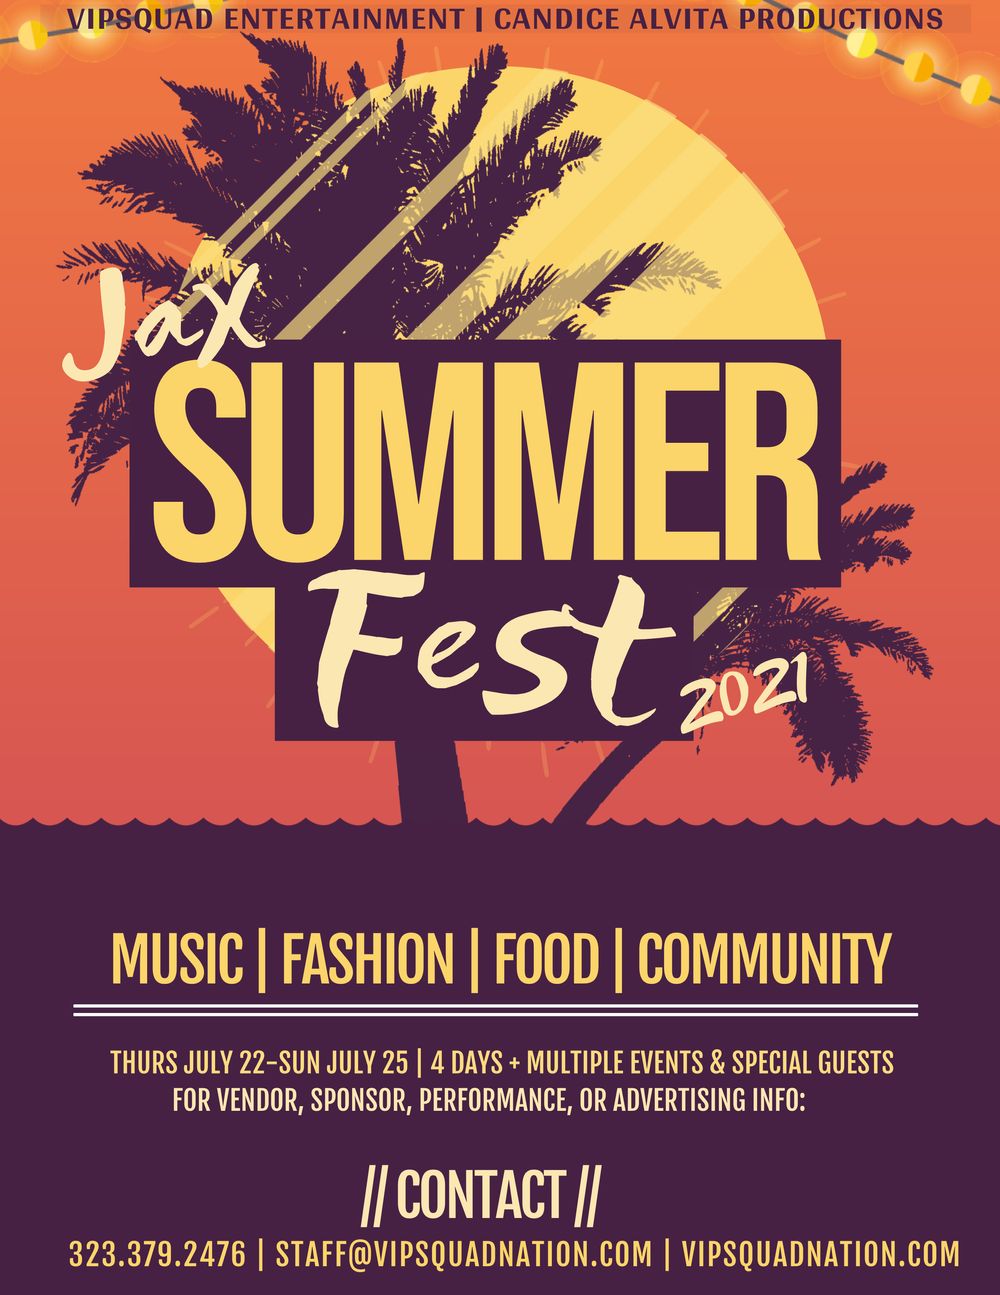 Jax Summer Fest 2021 will include a Back 2 School Supply Drive, an adult and youth Flag Football Tournament, and our annual Feed Those In Need event -- find info at JaxSummerFest2021.eventbrite.com